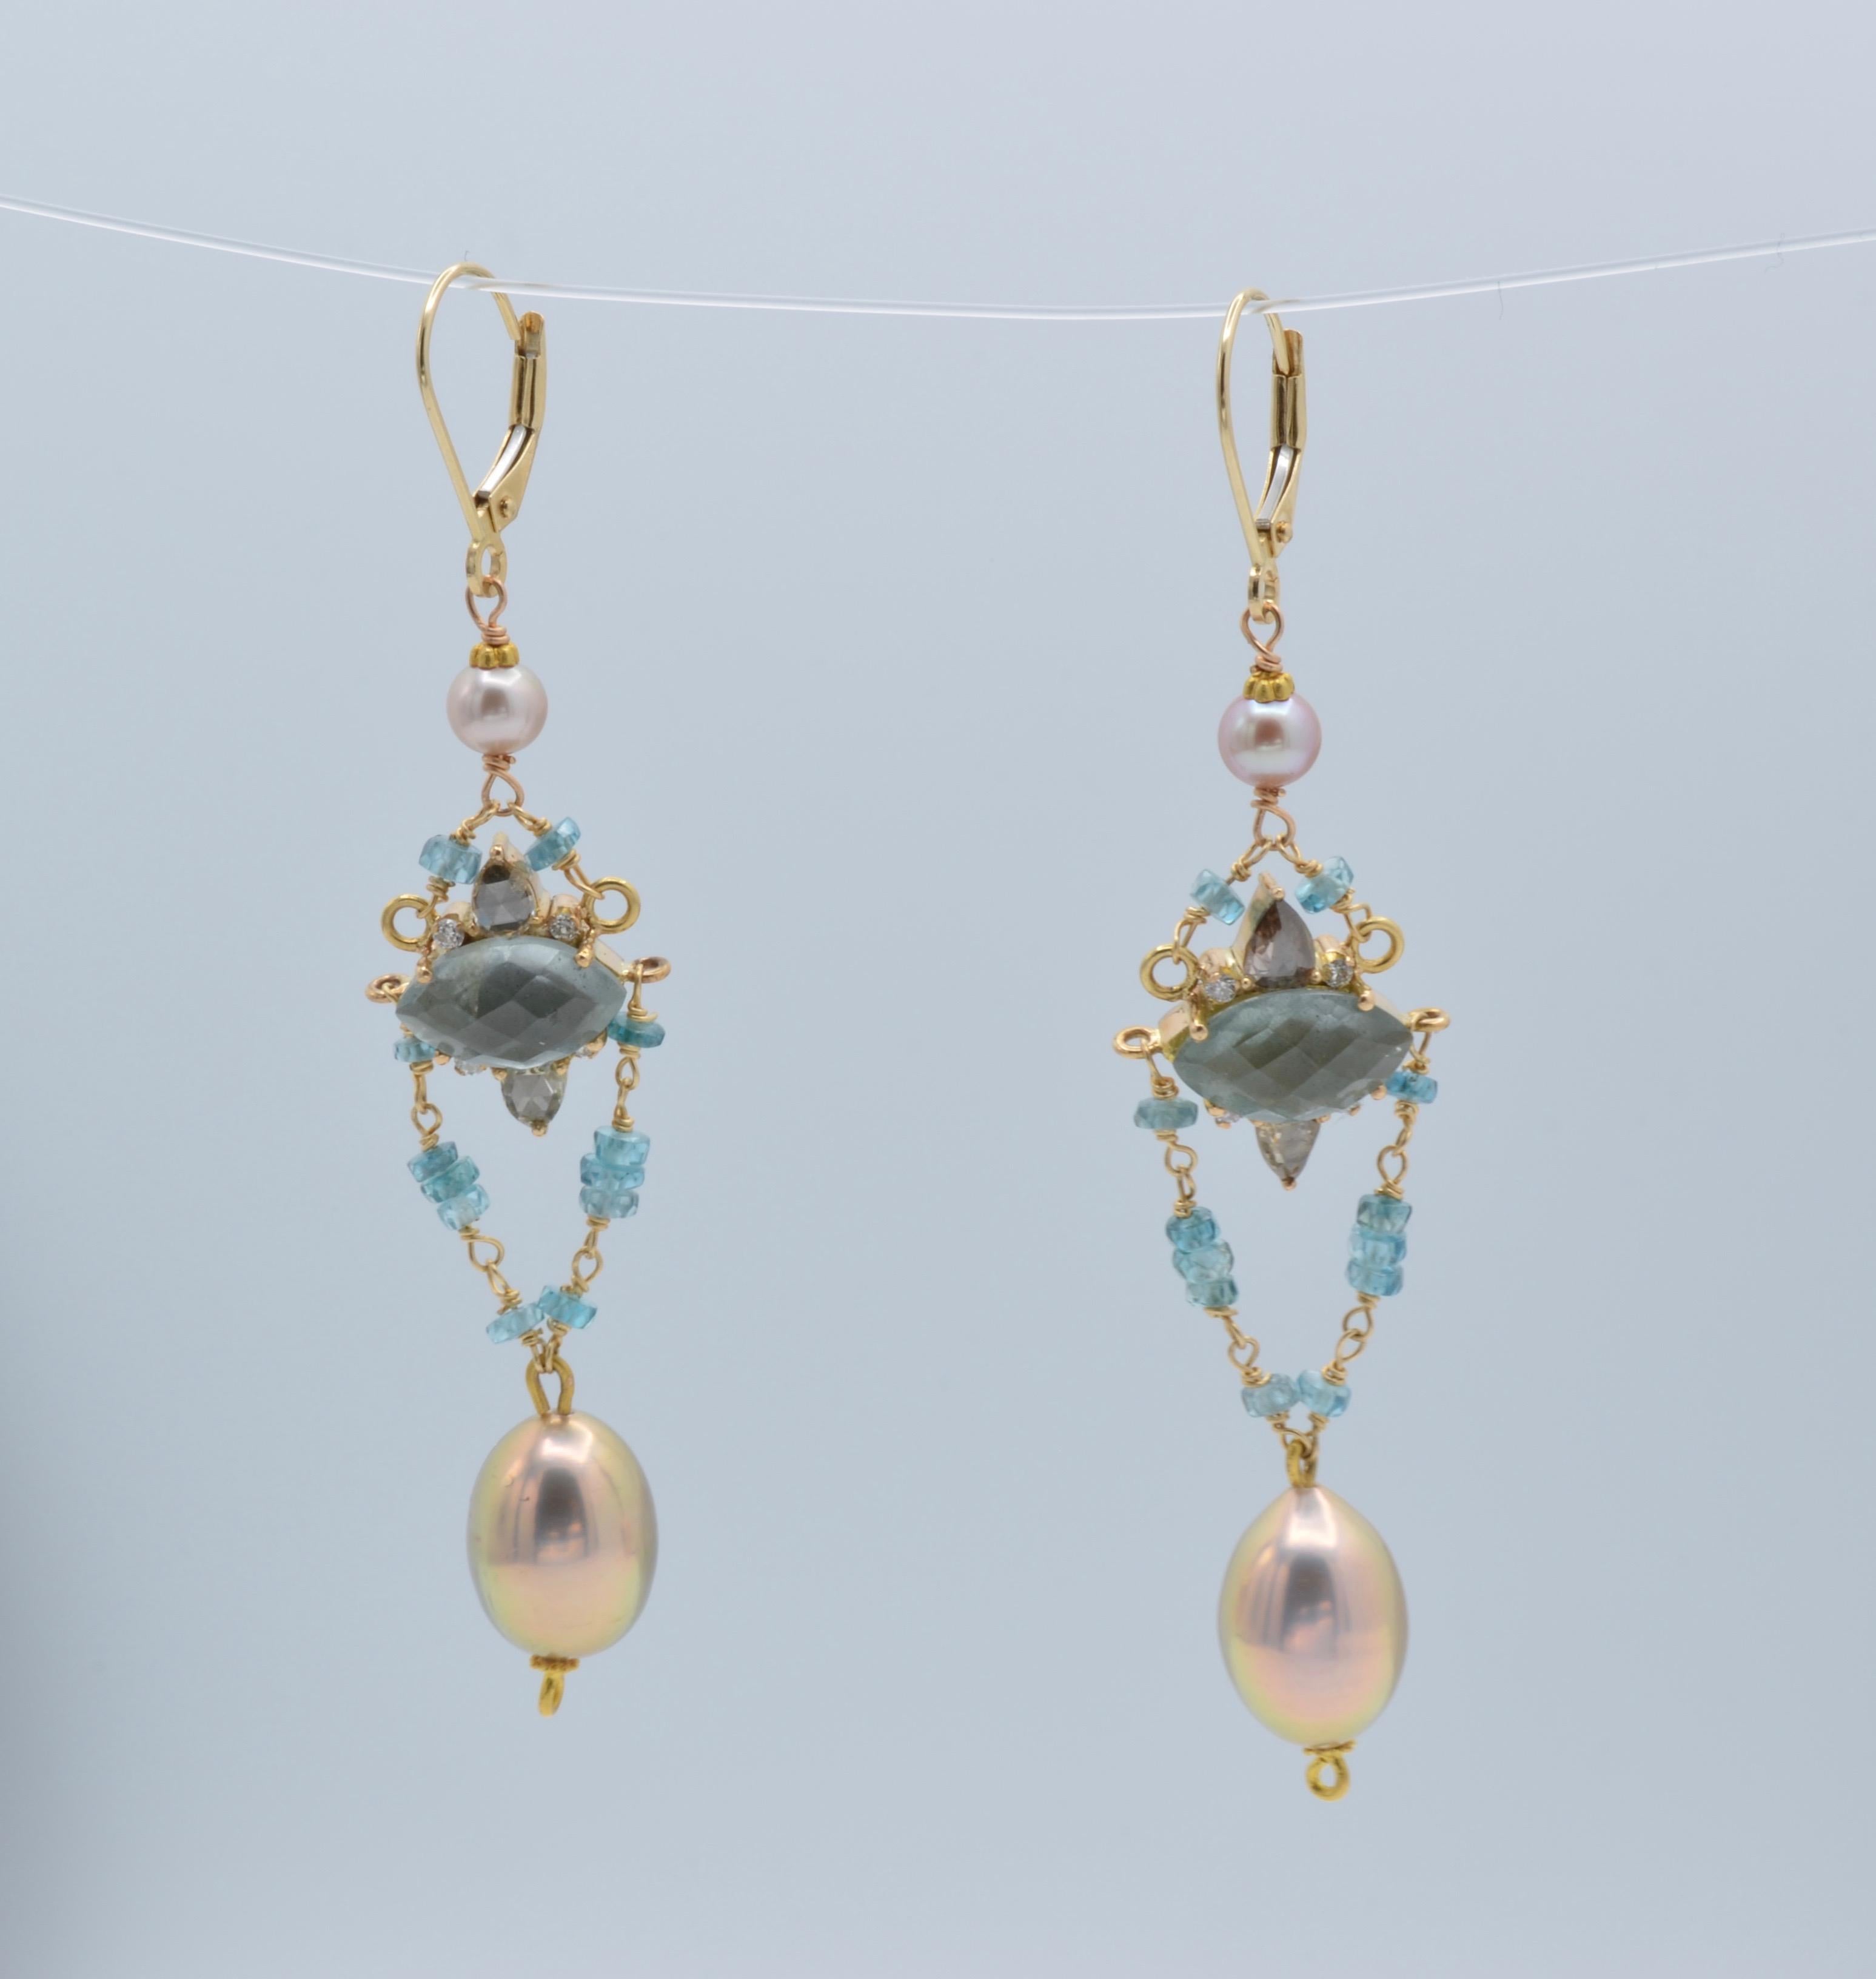 These beautiful statement earrings are an array of subtle color and light. The moss aquamarine and diamond centers are delicately framed in apatite beads and natural pink pearls.